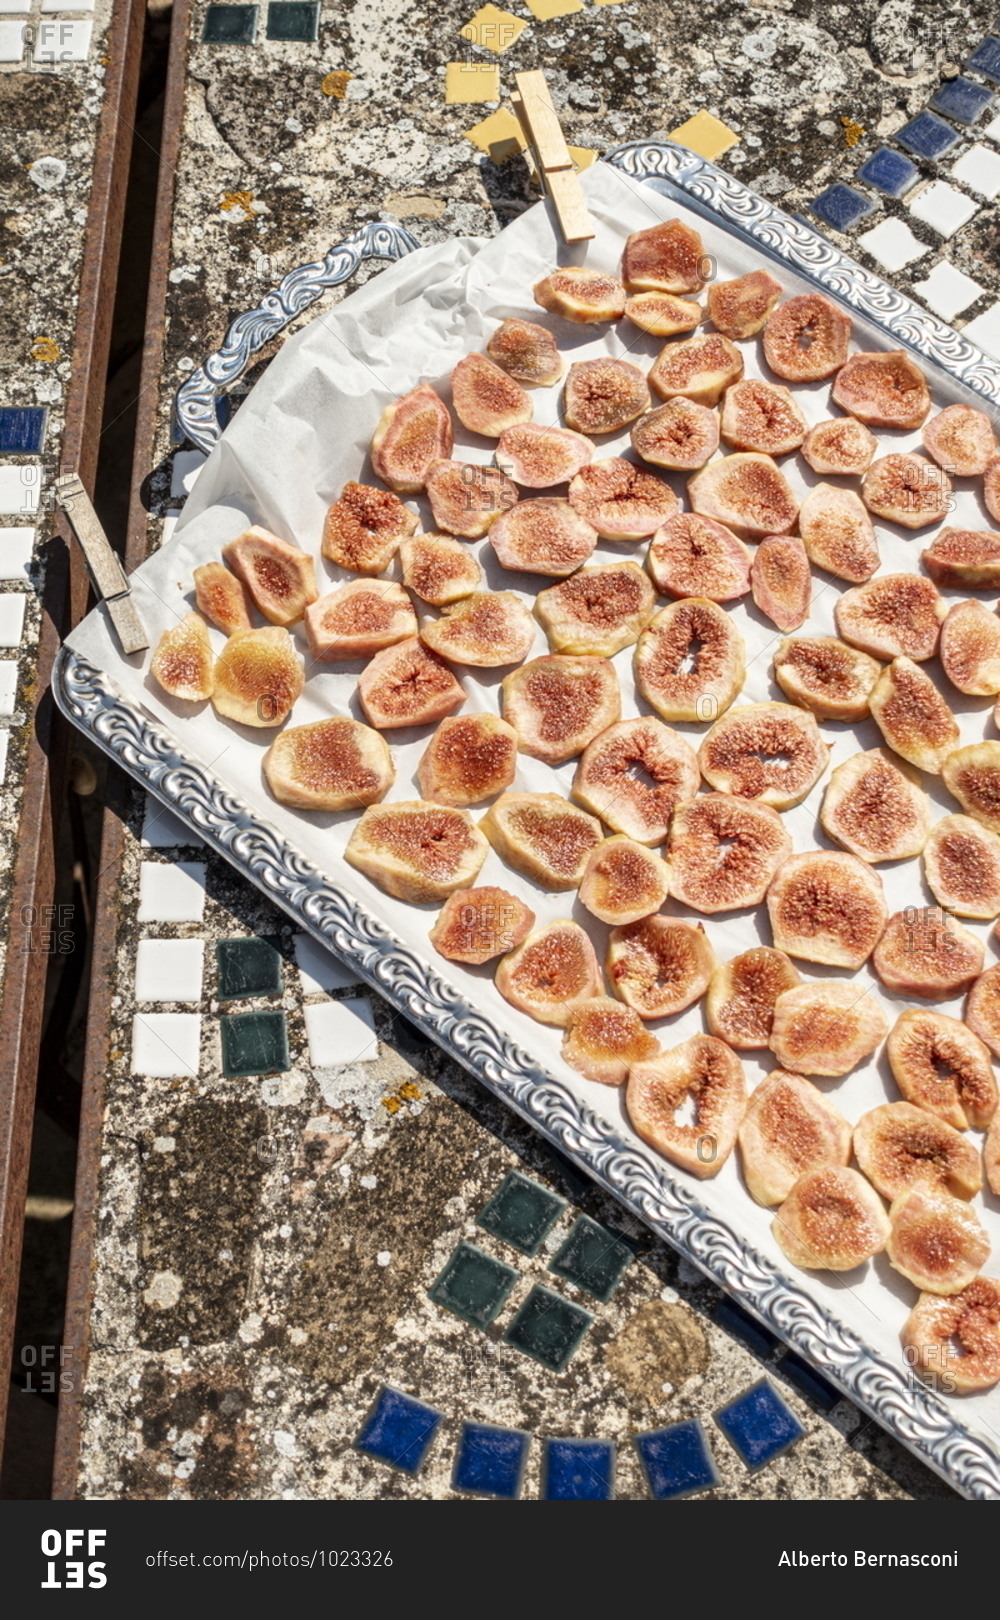 Dry figs on a tray, Marche, Italy